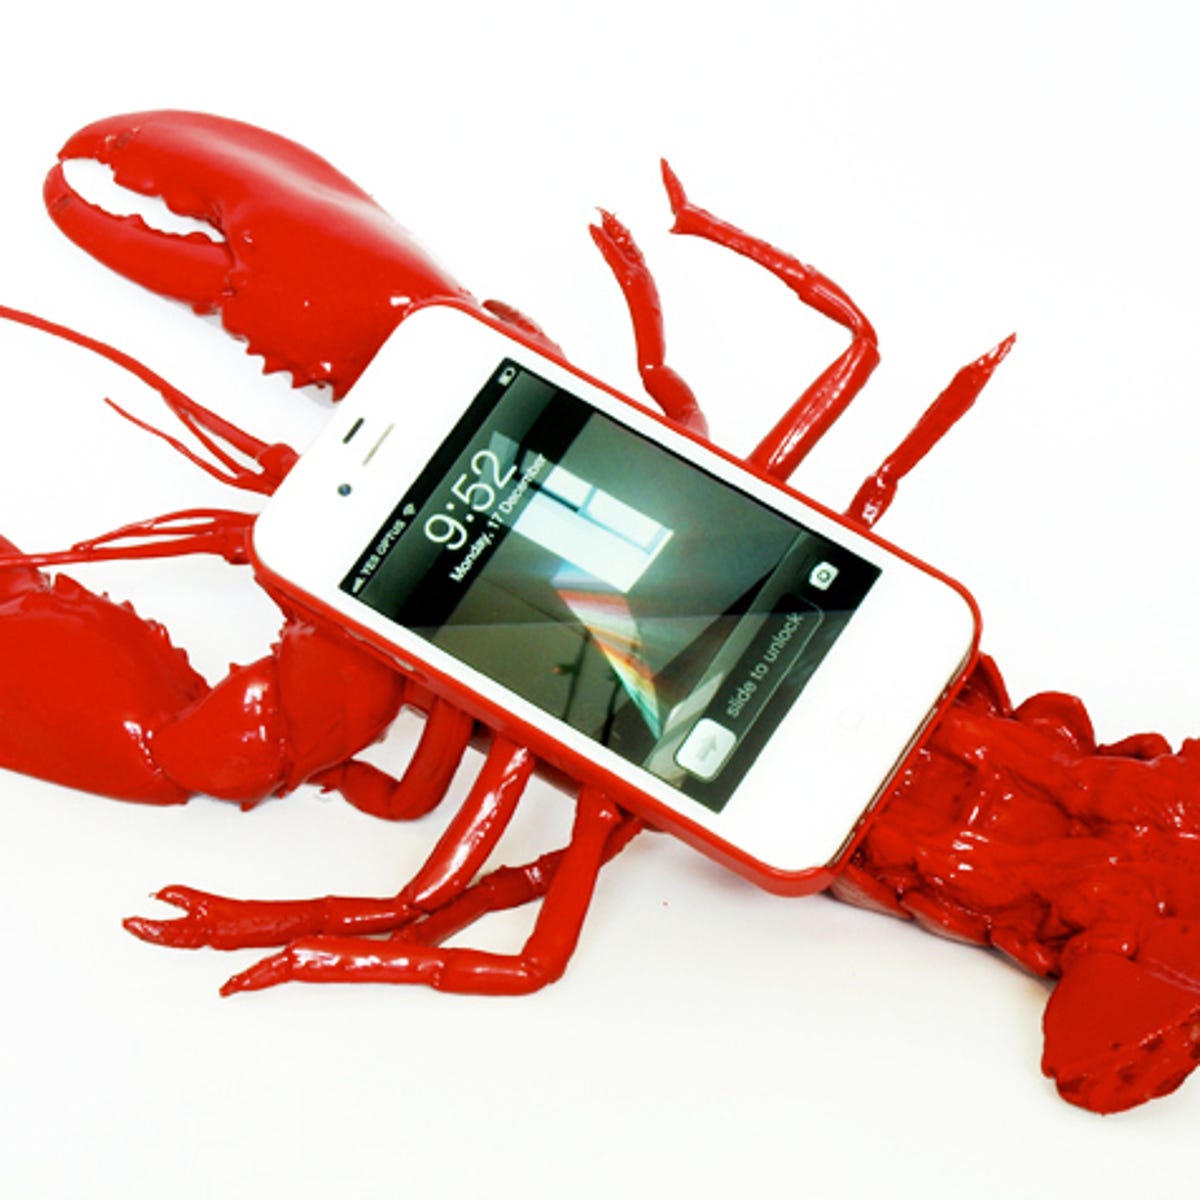 Lobster iPhone case is delightfully impractical - CNET